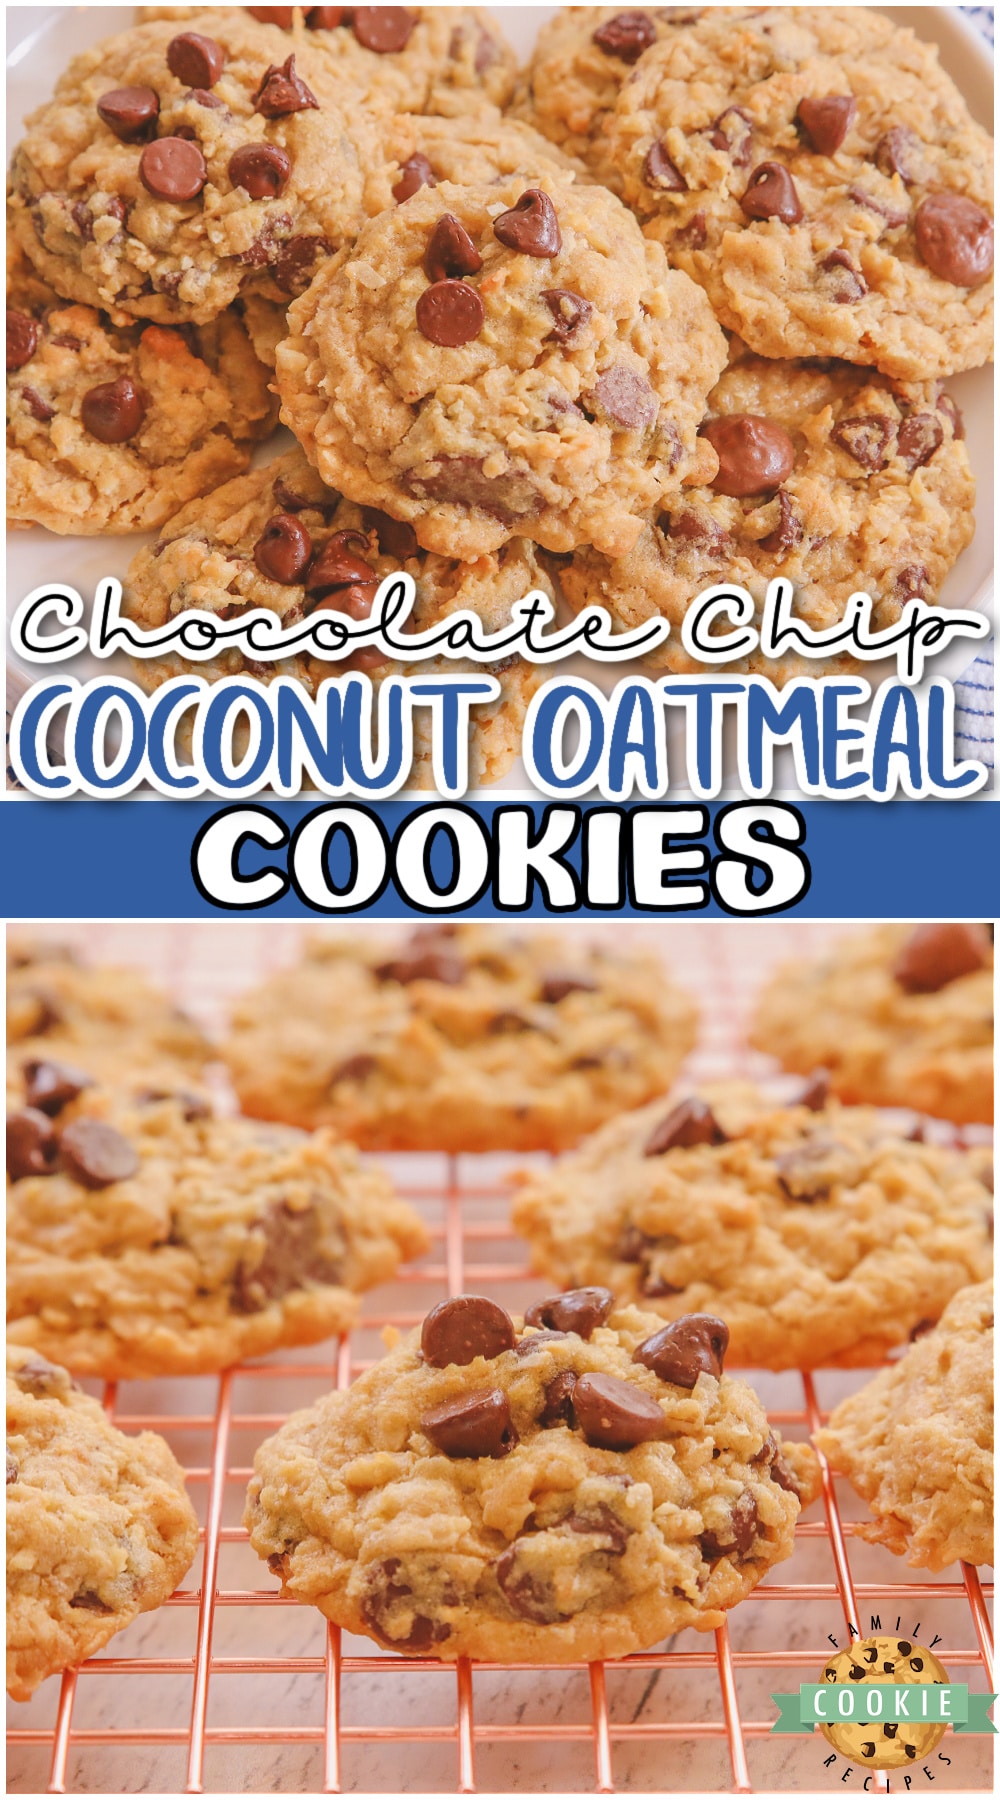 Chocolate Chip Coconut Oatmeal Cookies are packed with sweet coconut flakes, chocolate chips, and chewy oatmeal in every bite! These oatmeal chocolate chip cookies are so delicious, all the ingredients combined create a spectacular cookie like no other.